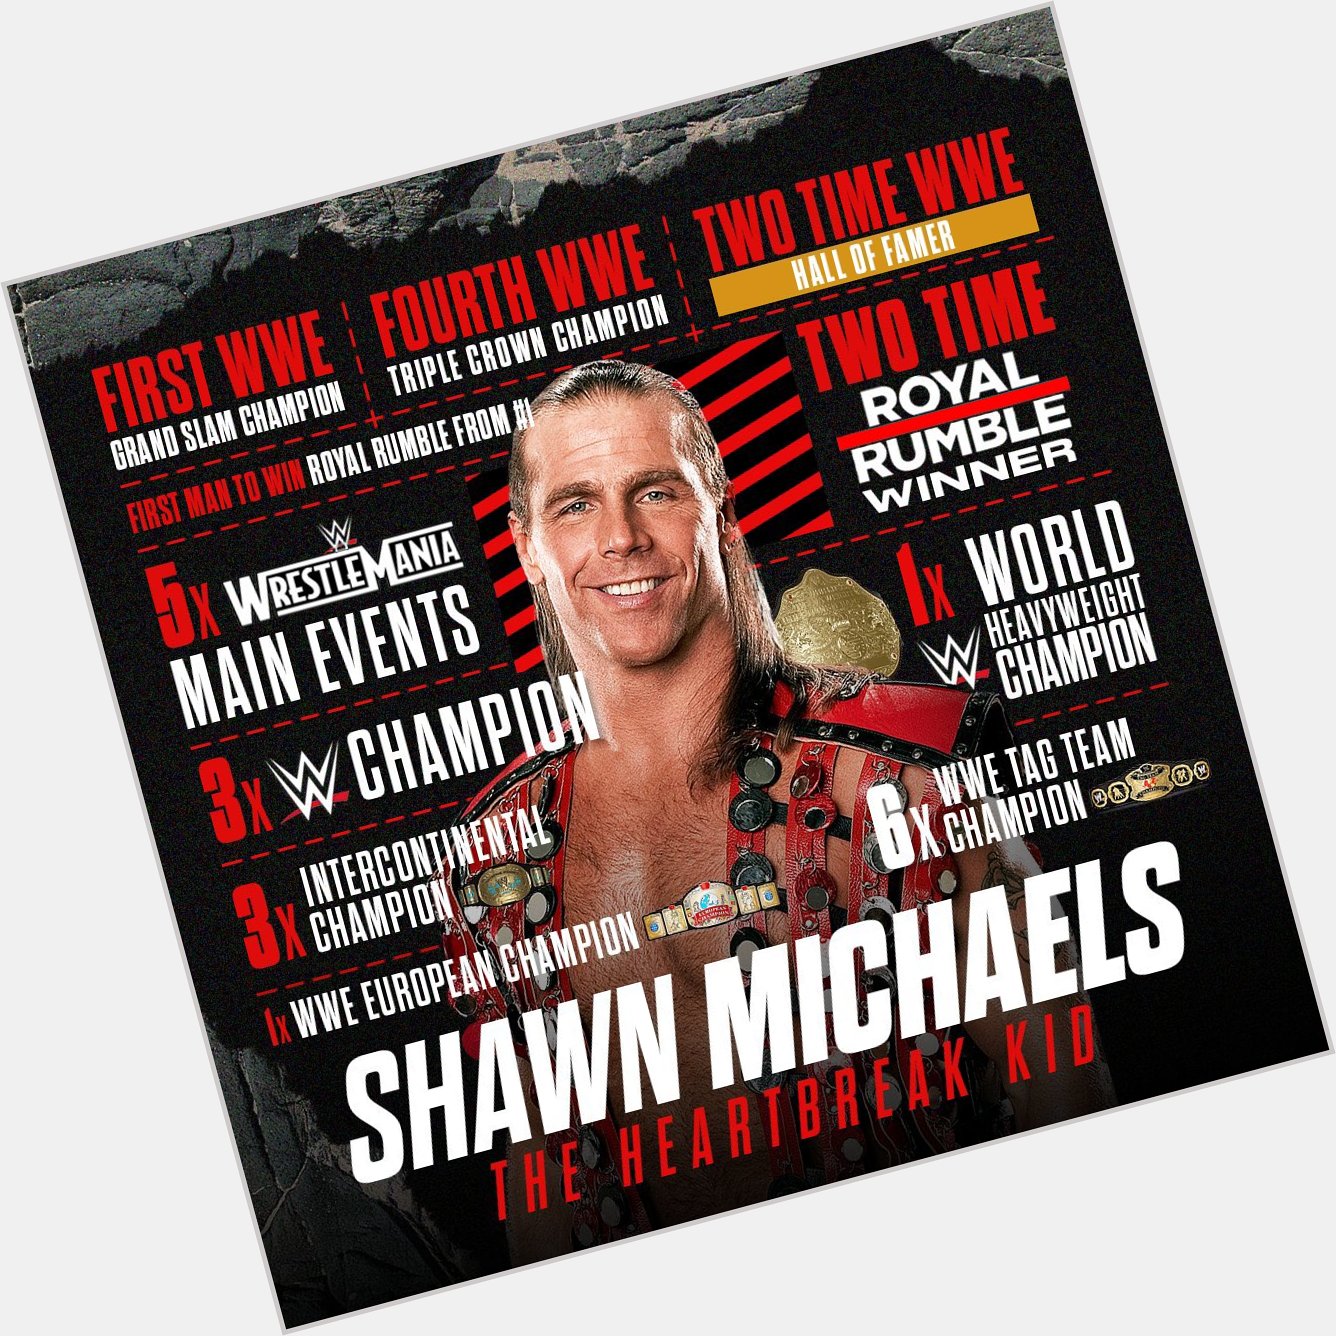 Happy birthday to one of the greatest performers to step foot in the ring Shawn Michaels 